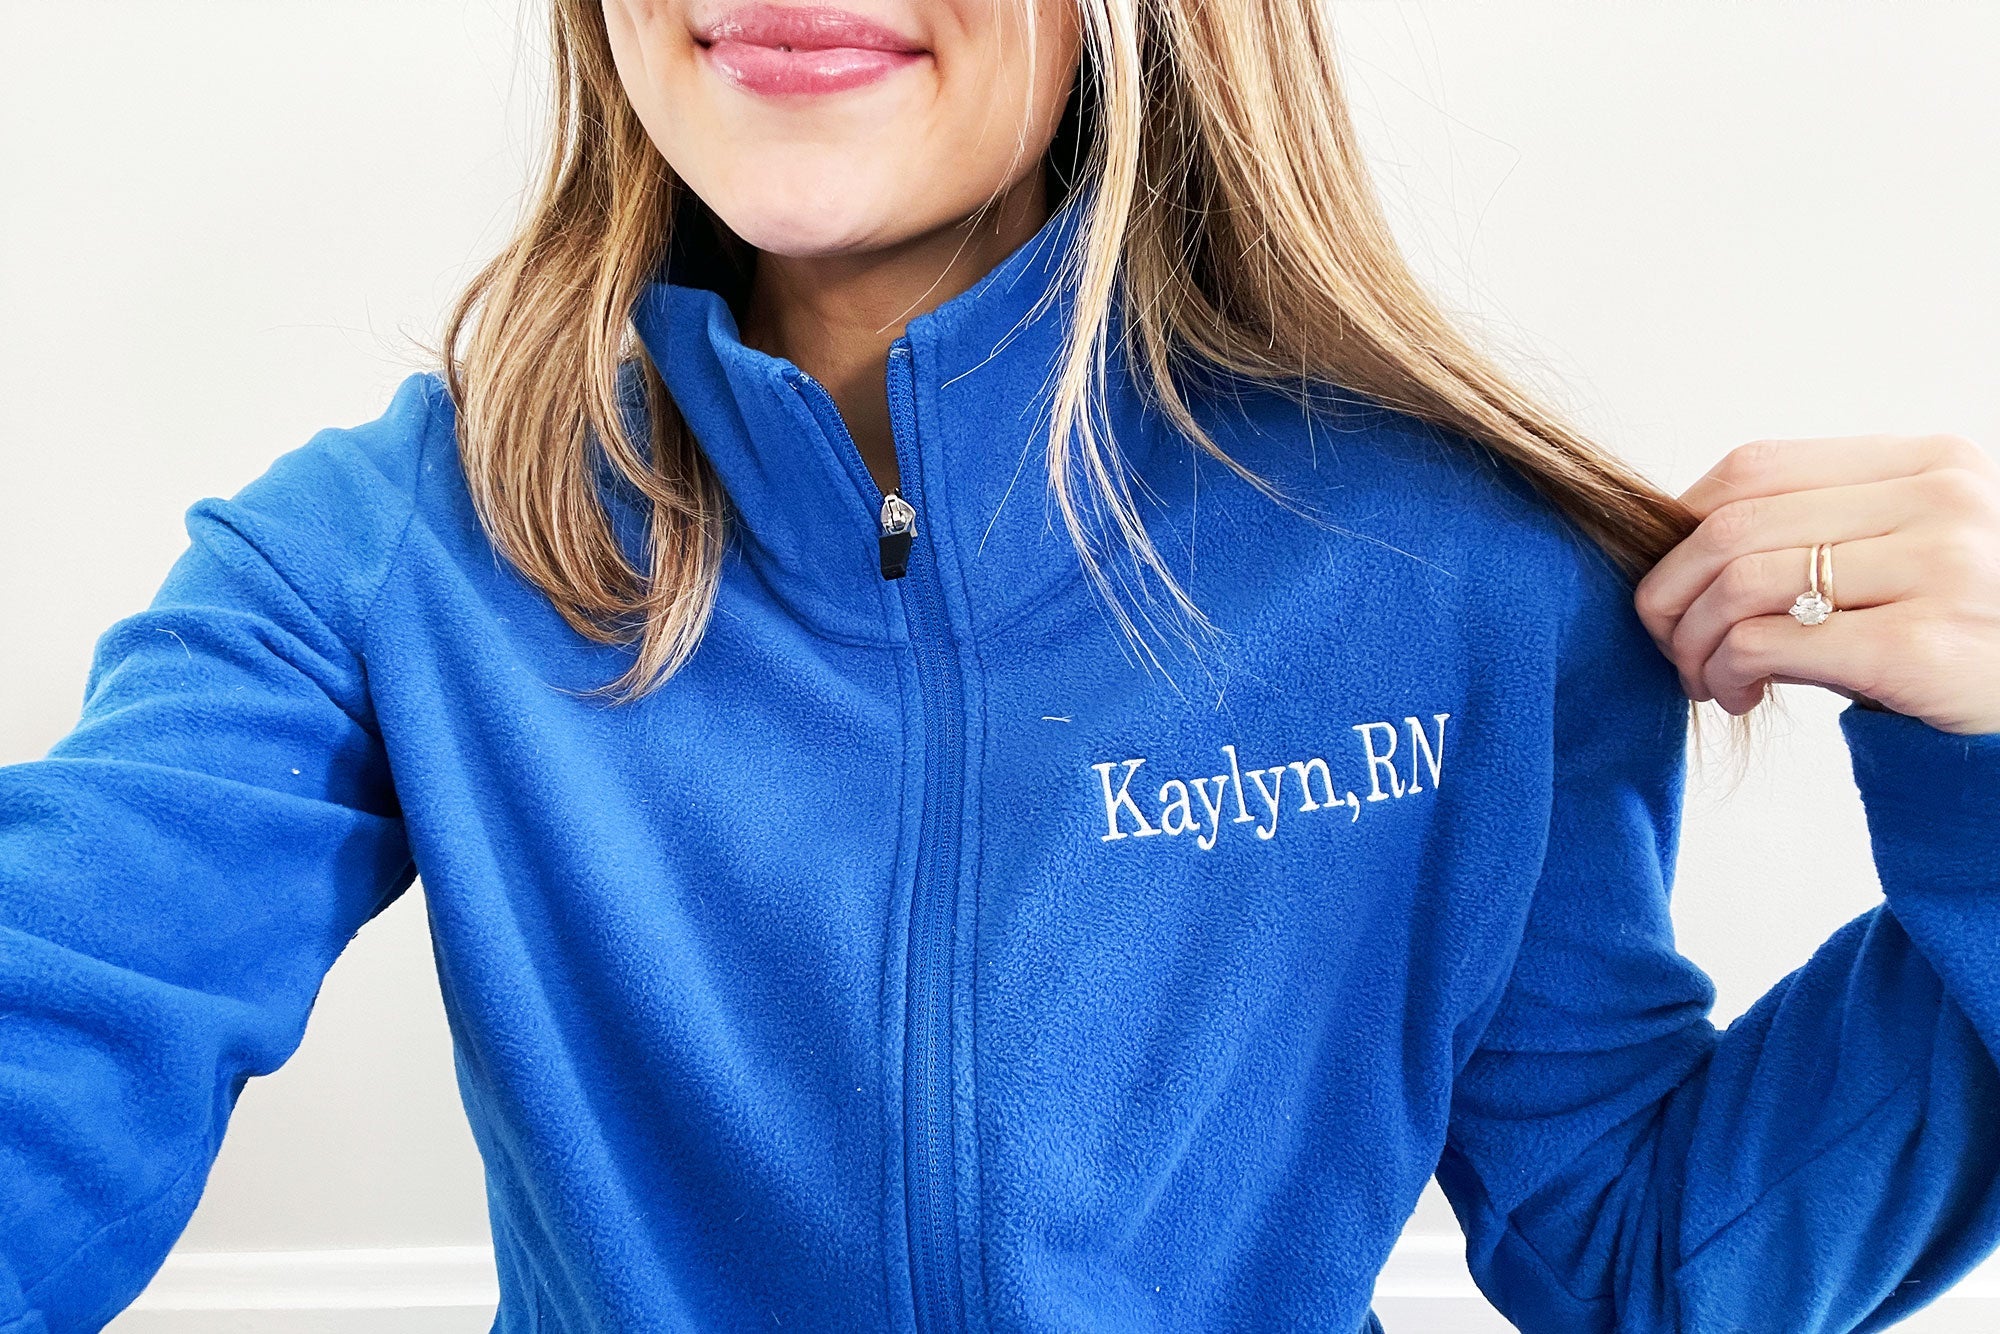 Ladies Monogrammed Fleece Jacket for Social Worker, Personalized  Embroidered With Your Name and Title, Gifts for Social Workers,personalized  